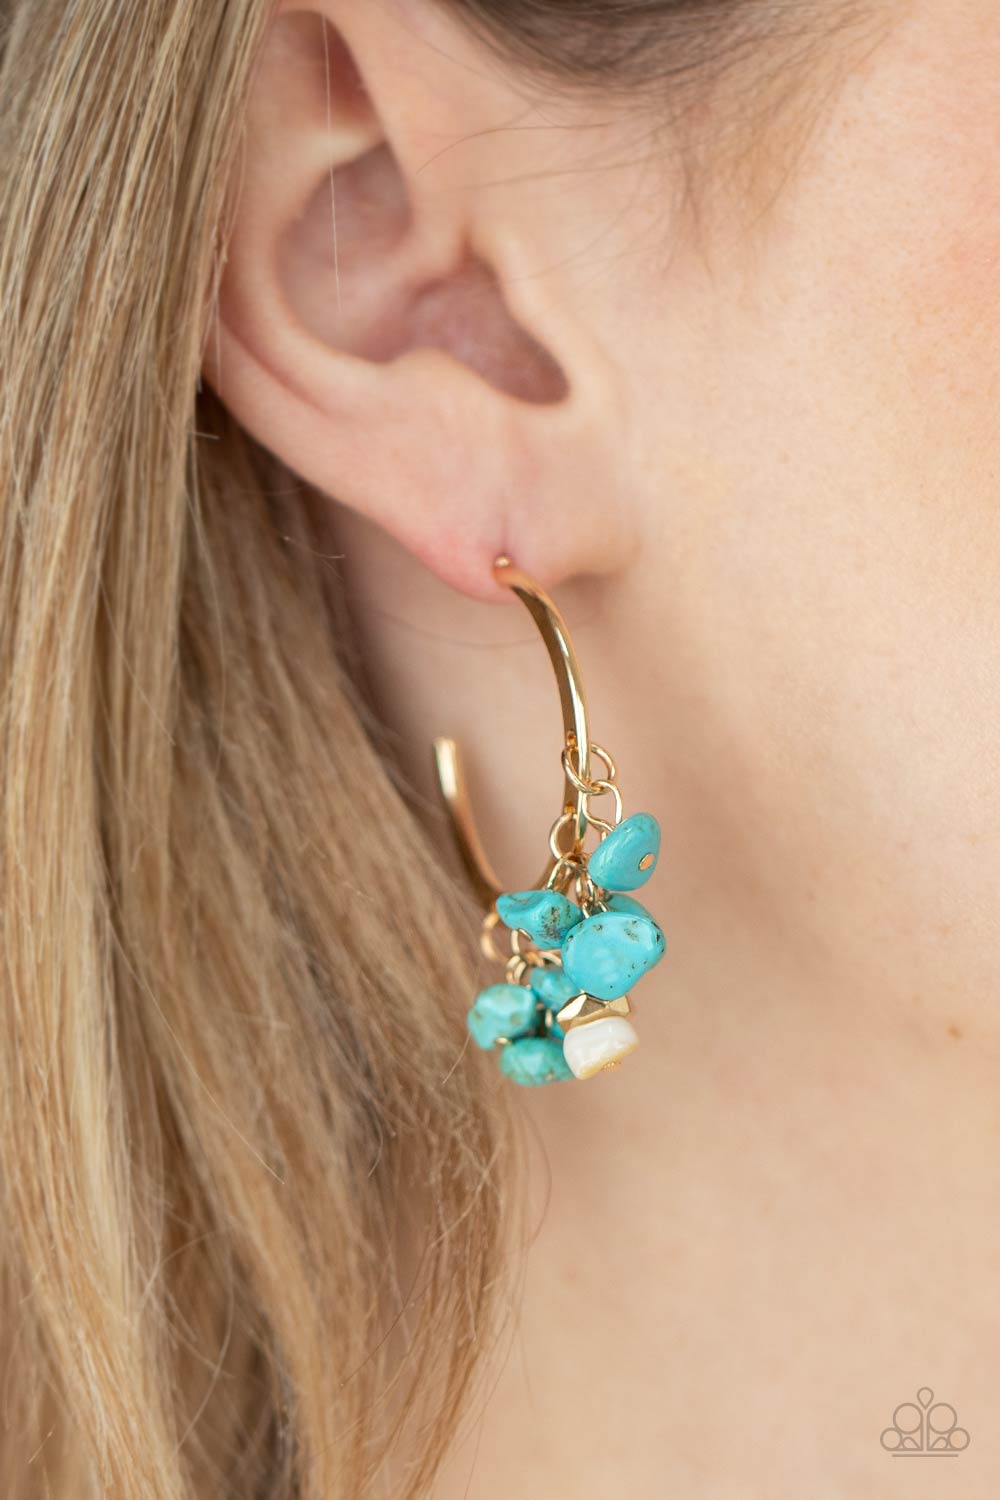 Gorgeously Grounding - Gold & Turquoise Hoop Earrings - Sabrina's Bling Collection